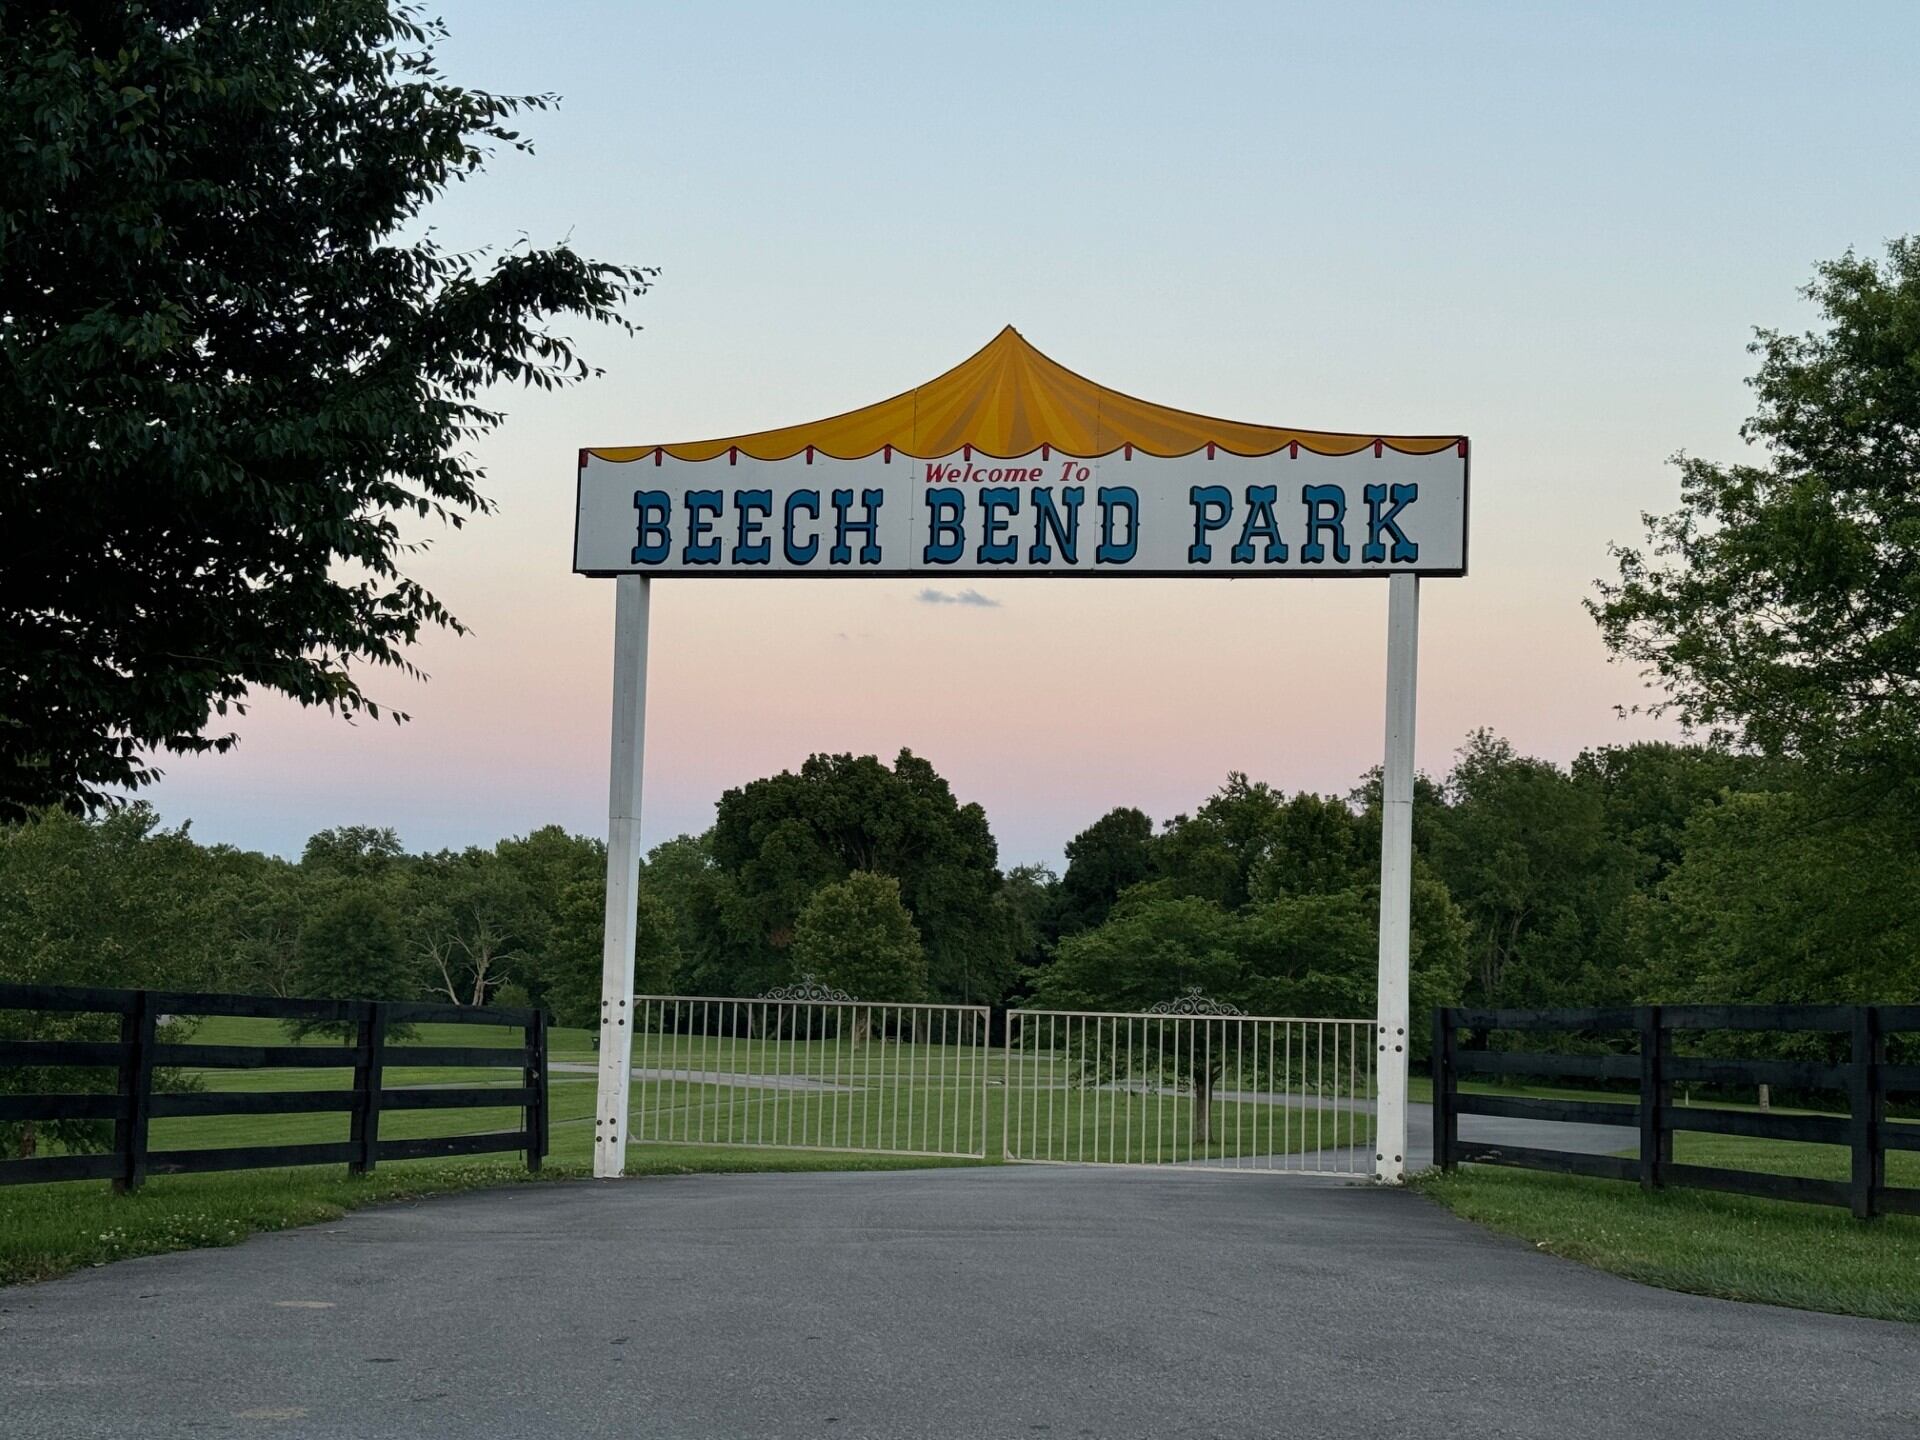 UPDATE: Richardsville Fire Department responded to reported trapped riders at Beech Bend Park Sunday night